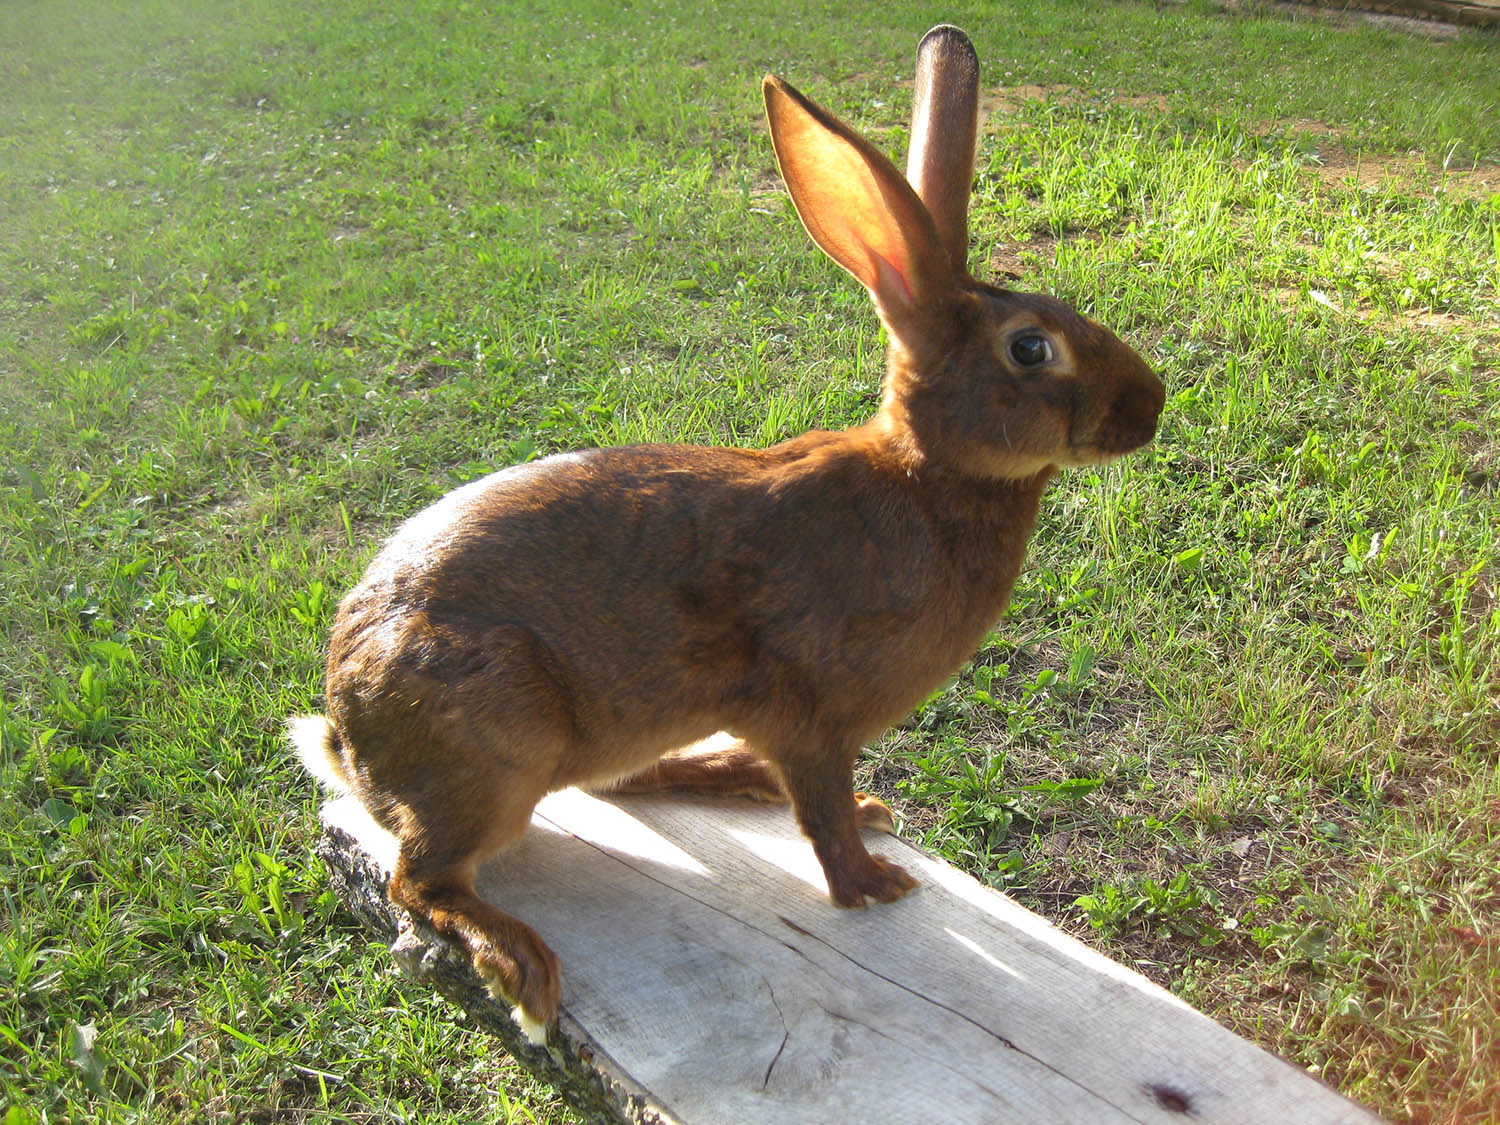 THE BELGIAN HARE